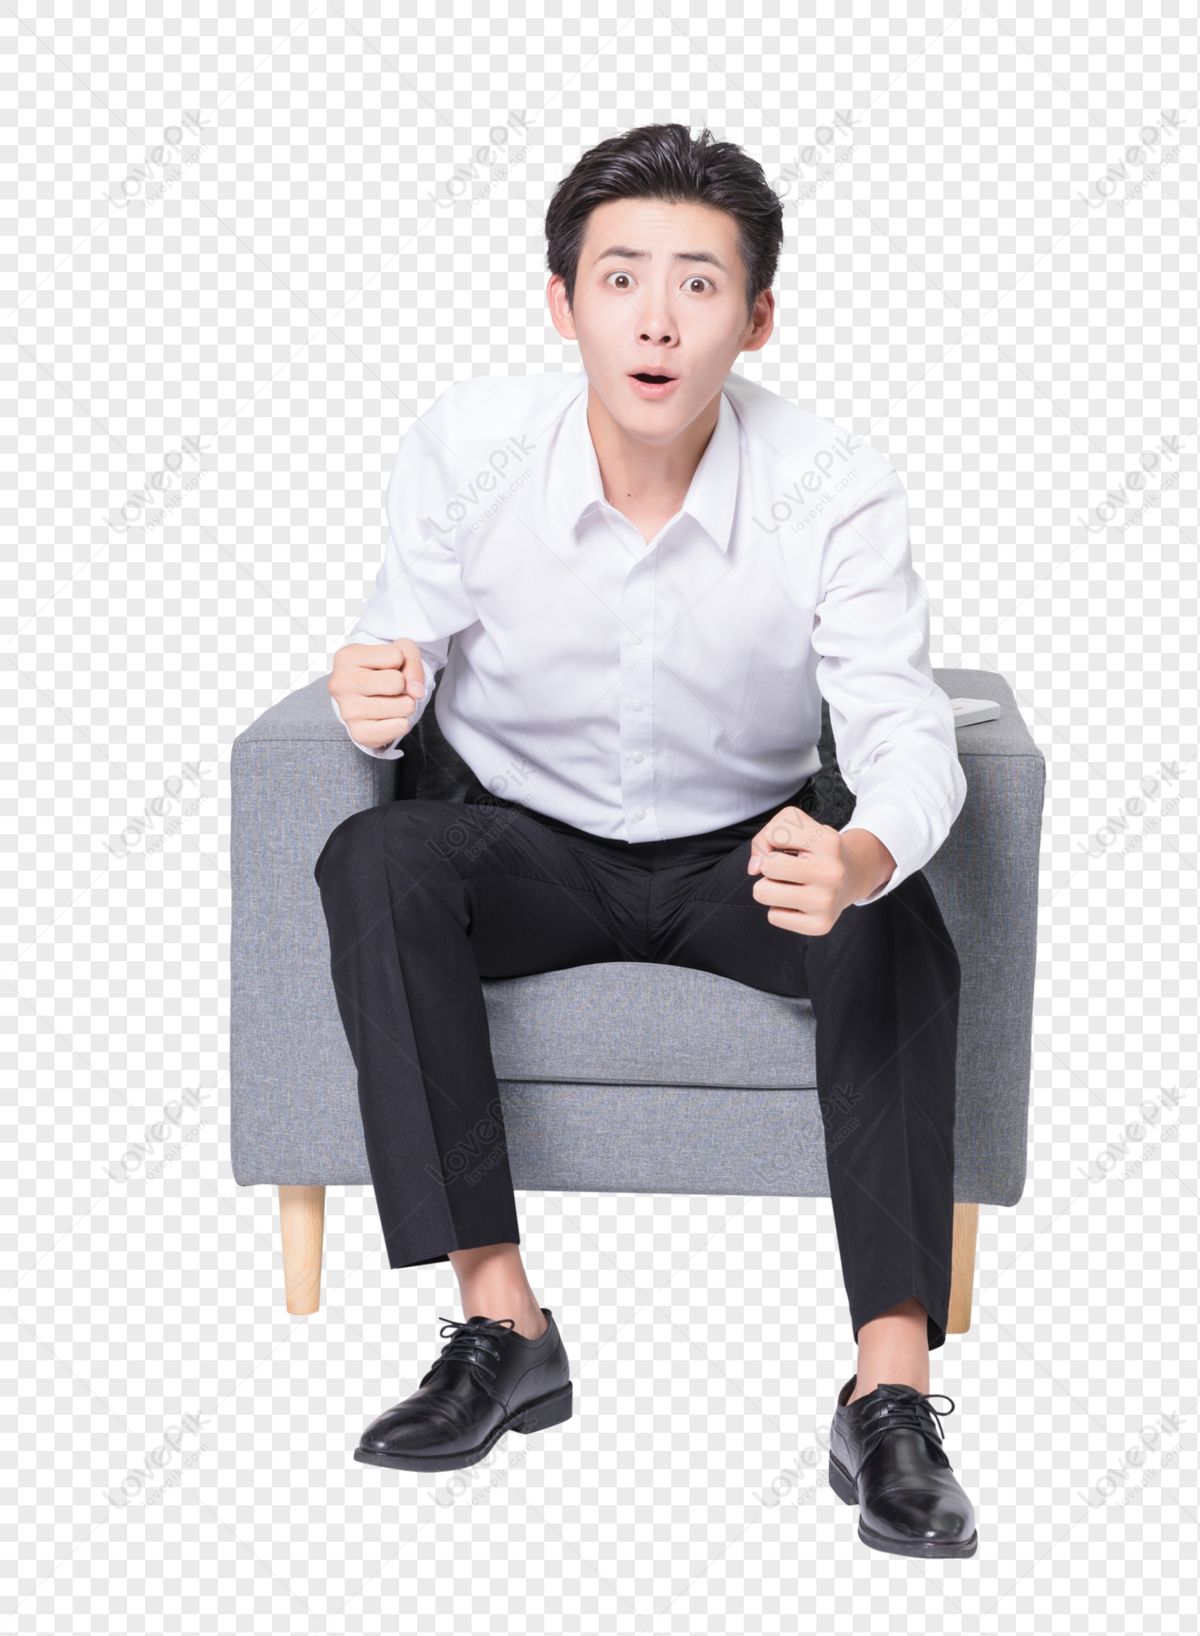 Excited Business Man, Man Sitting, Career, Excited Person PNG White ...